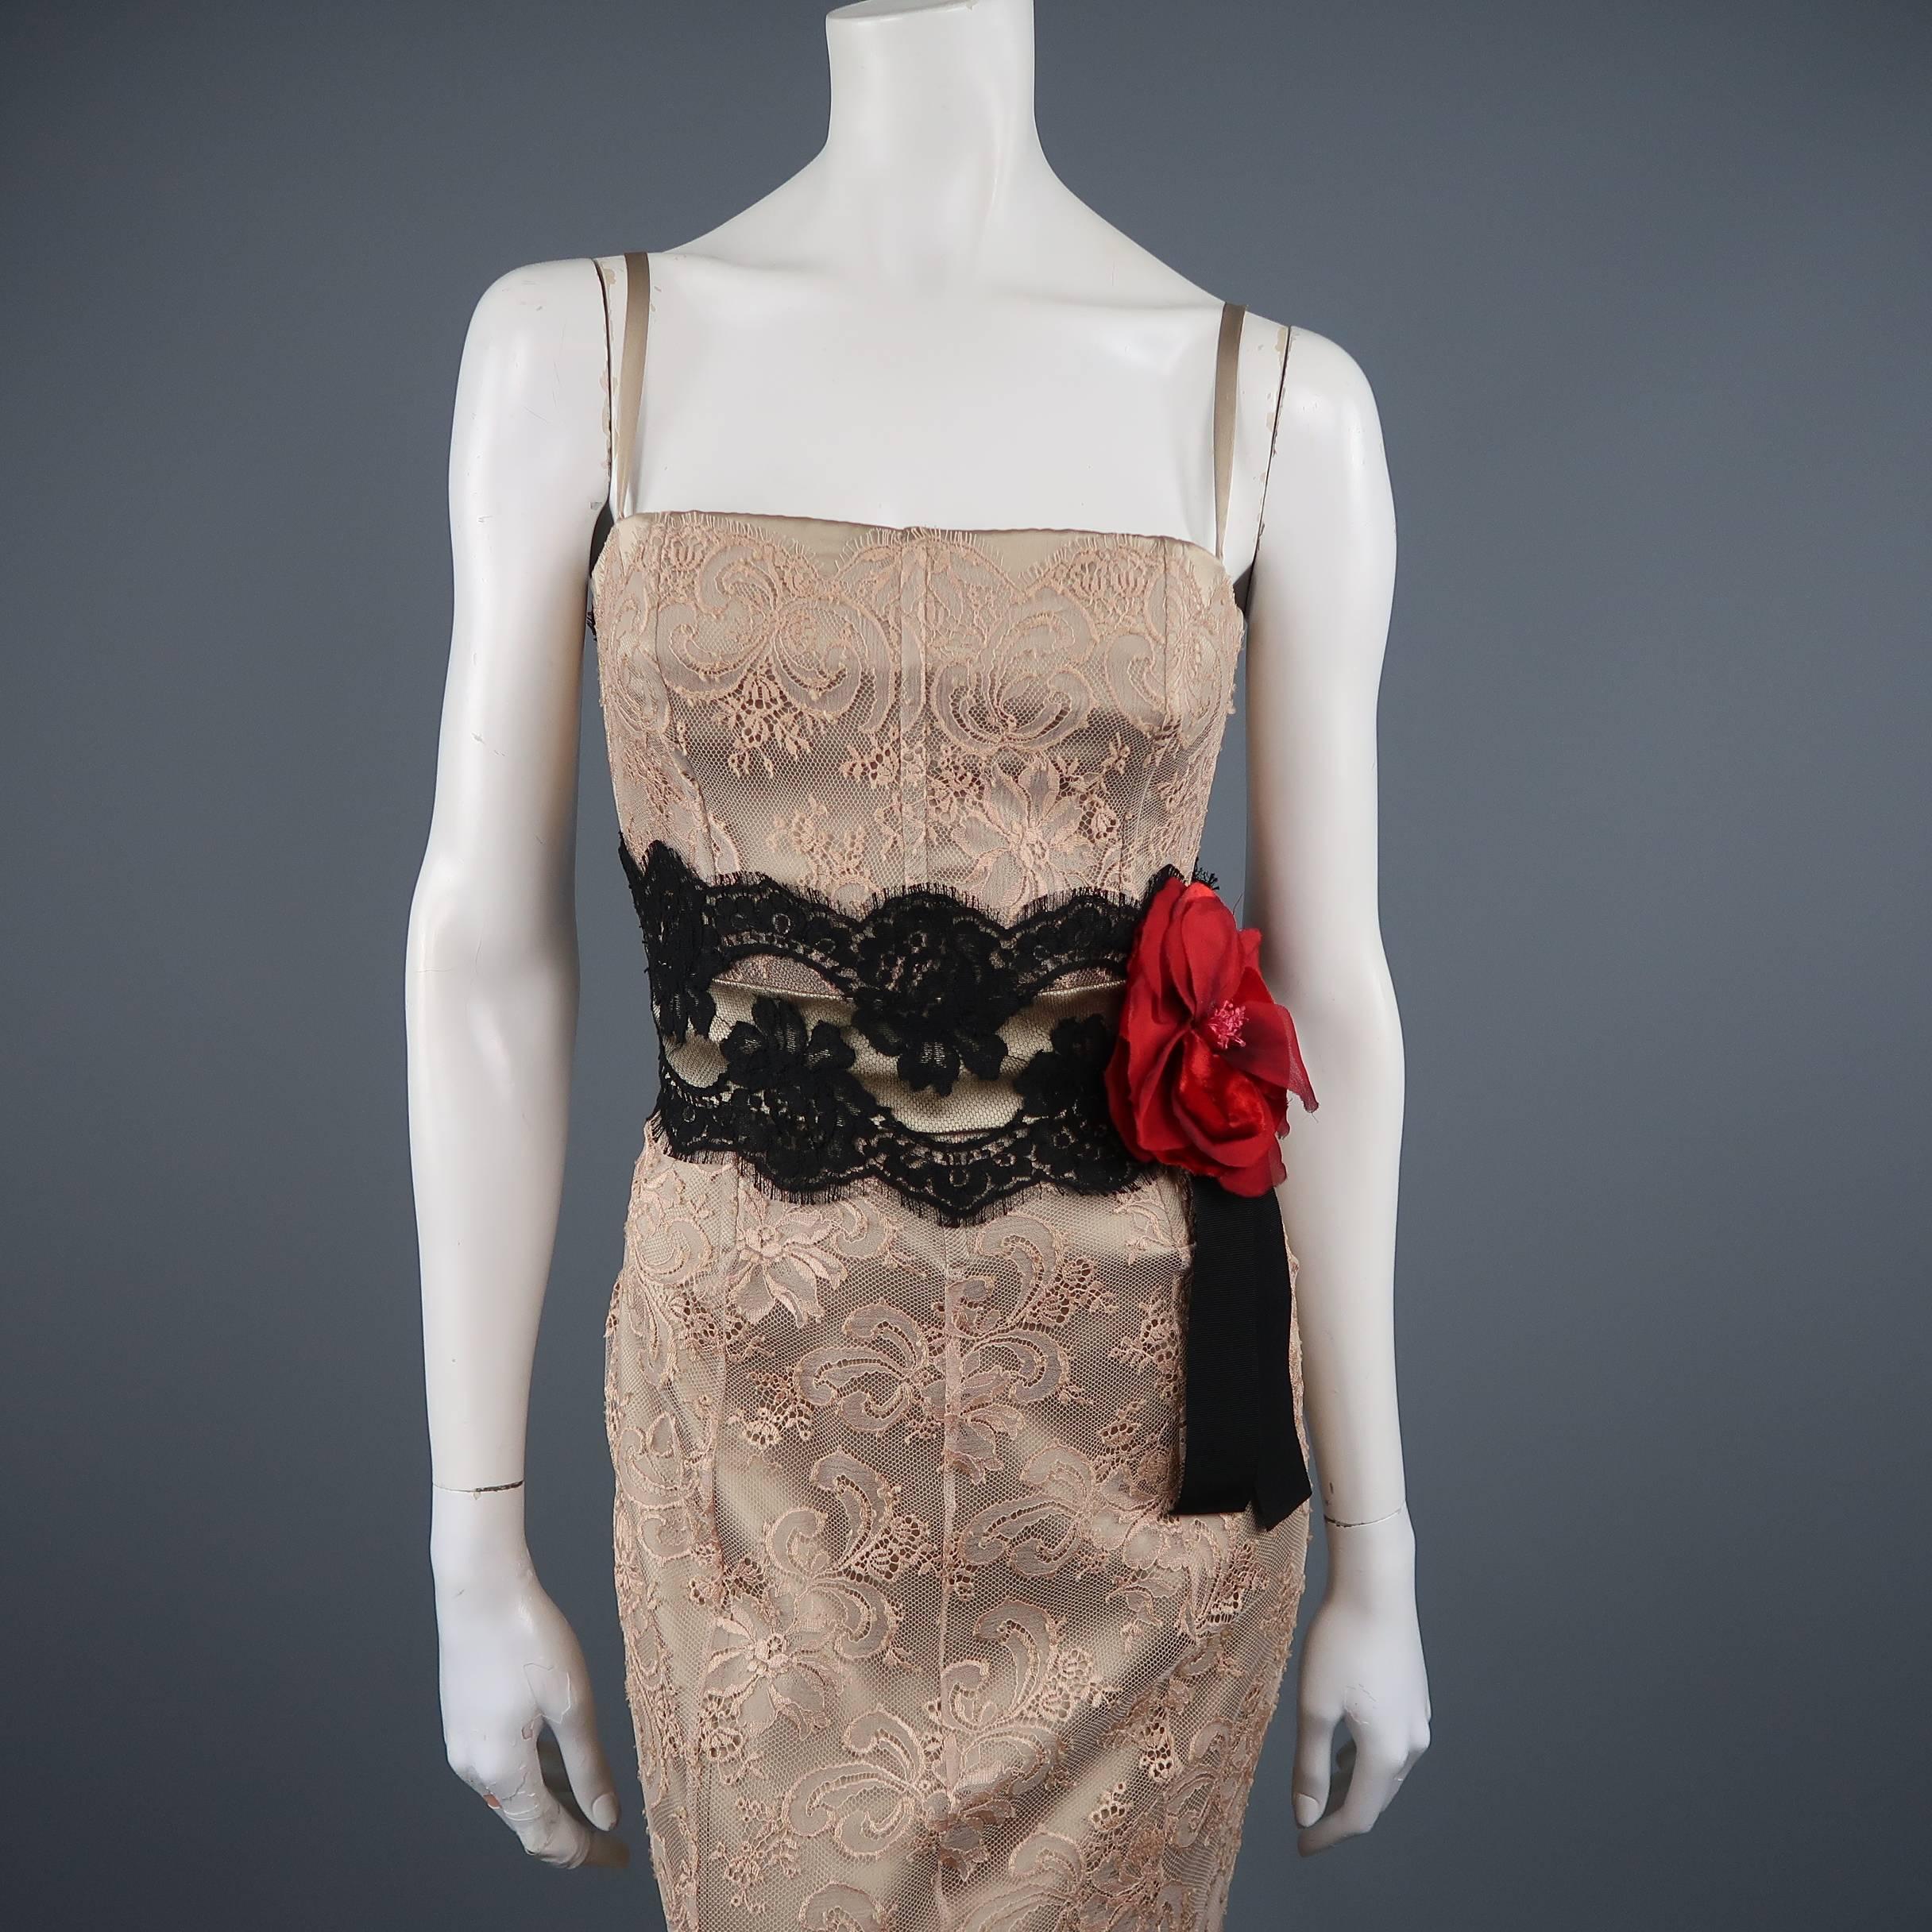 This stunning DOLCE & GABBANA evening gown beige silk satin with a lace overlay and features a boned bustier bodice, thick black lace waistband, and crimson red chiffon and velvet flower applique at waist. Made in Italy.  Retailed: $4500.00
 
Very